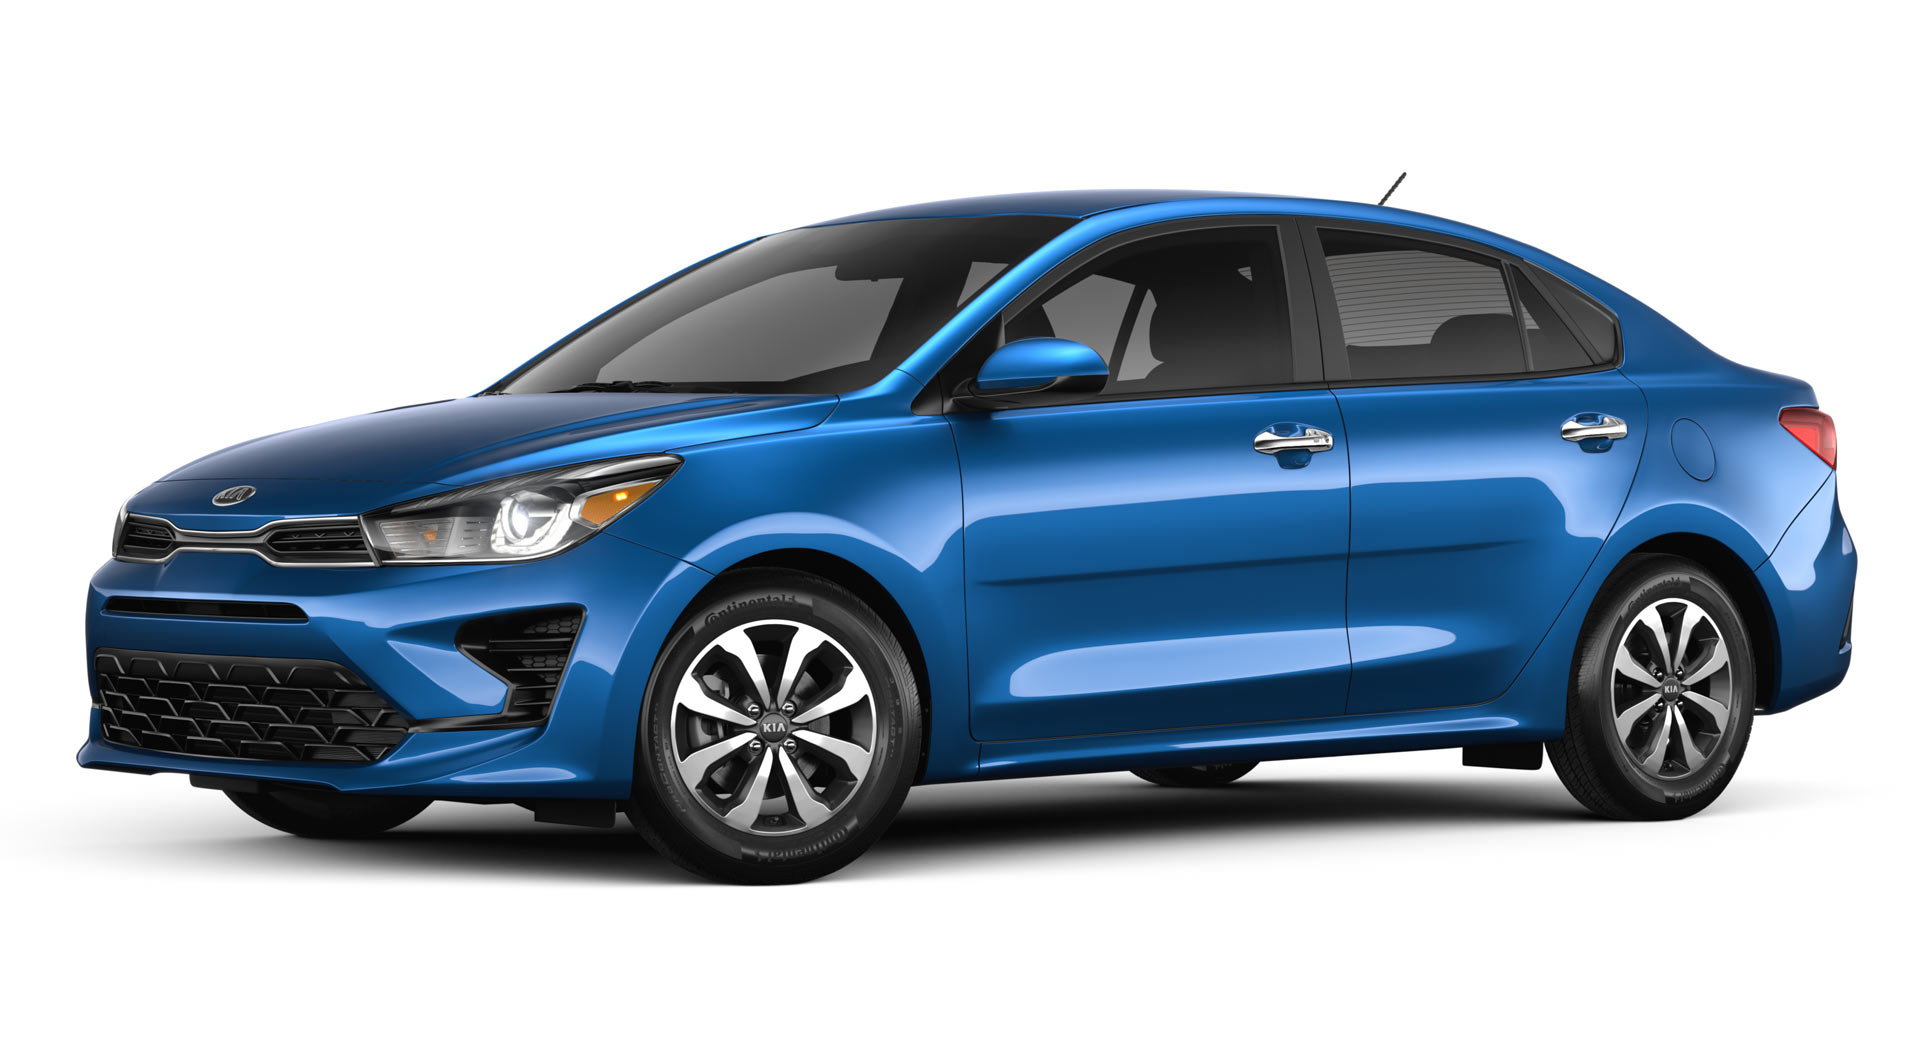  2022  Kia  Rio  Arrives In America With Updated Looks And New 